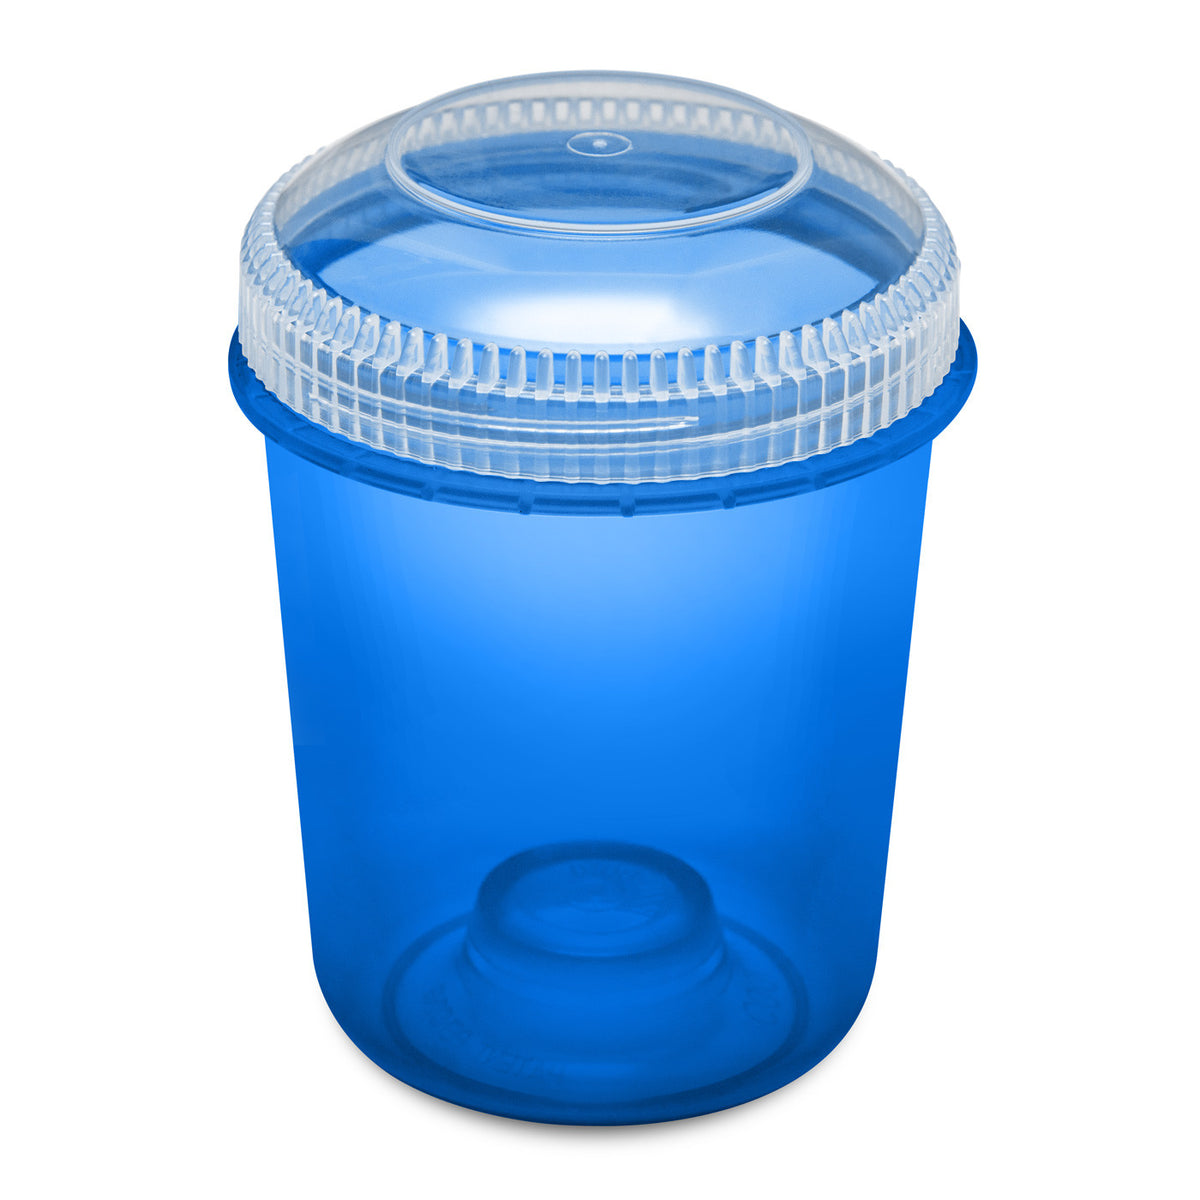 8oz (60 Dram) Plastic Container with Clear Lid - MOQ 250,000